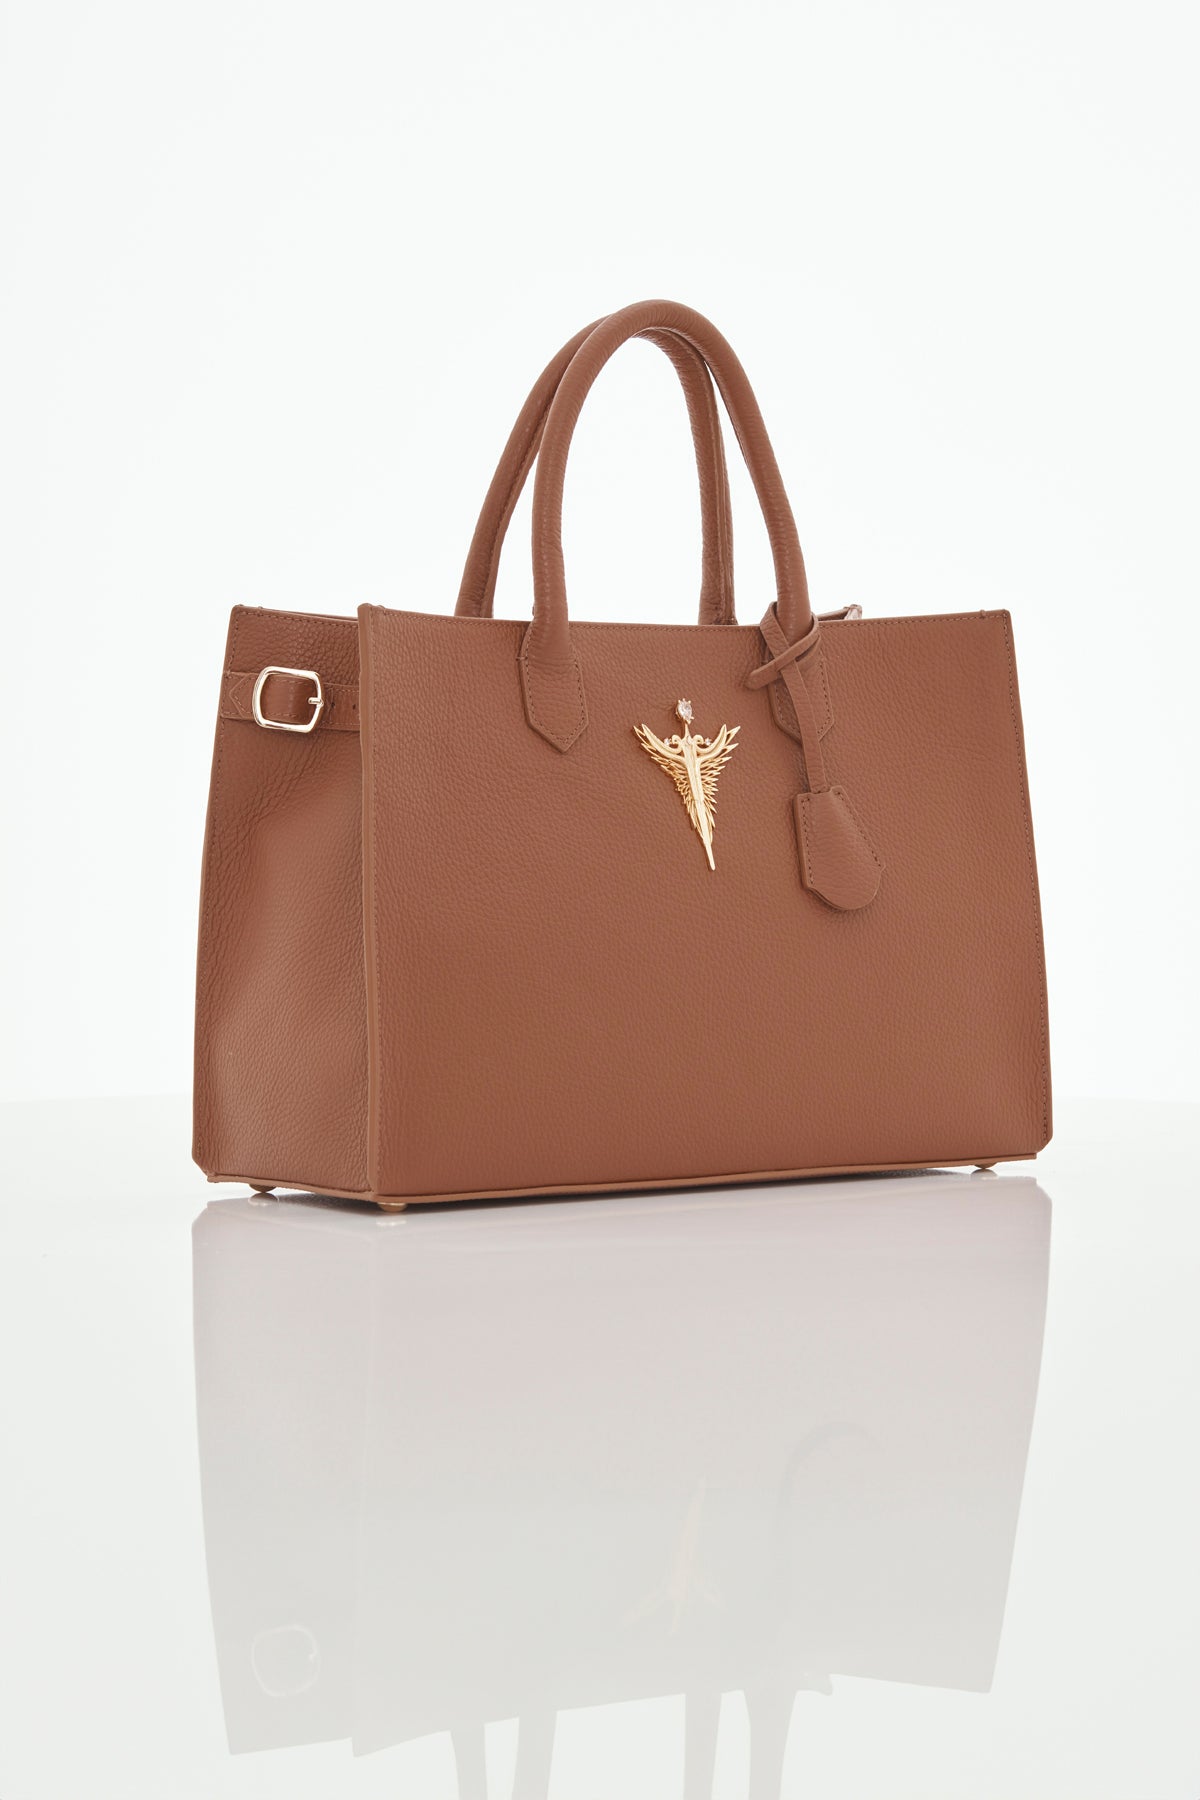 caramel brown michael genuine leather women's tote bag side